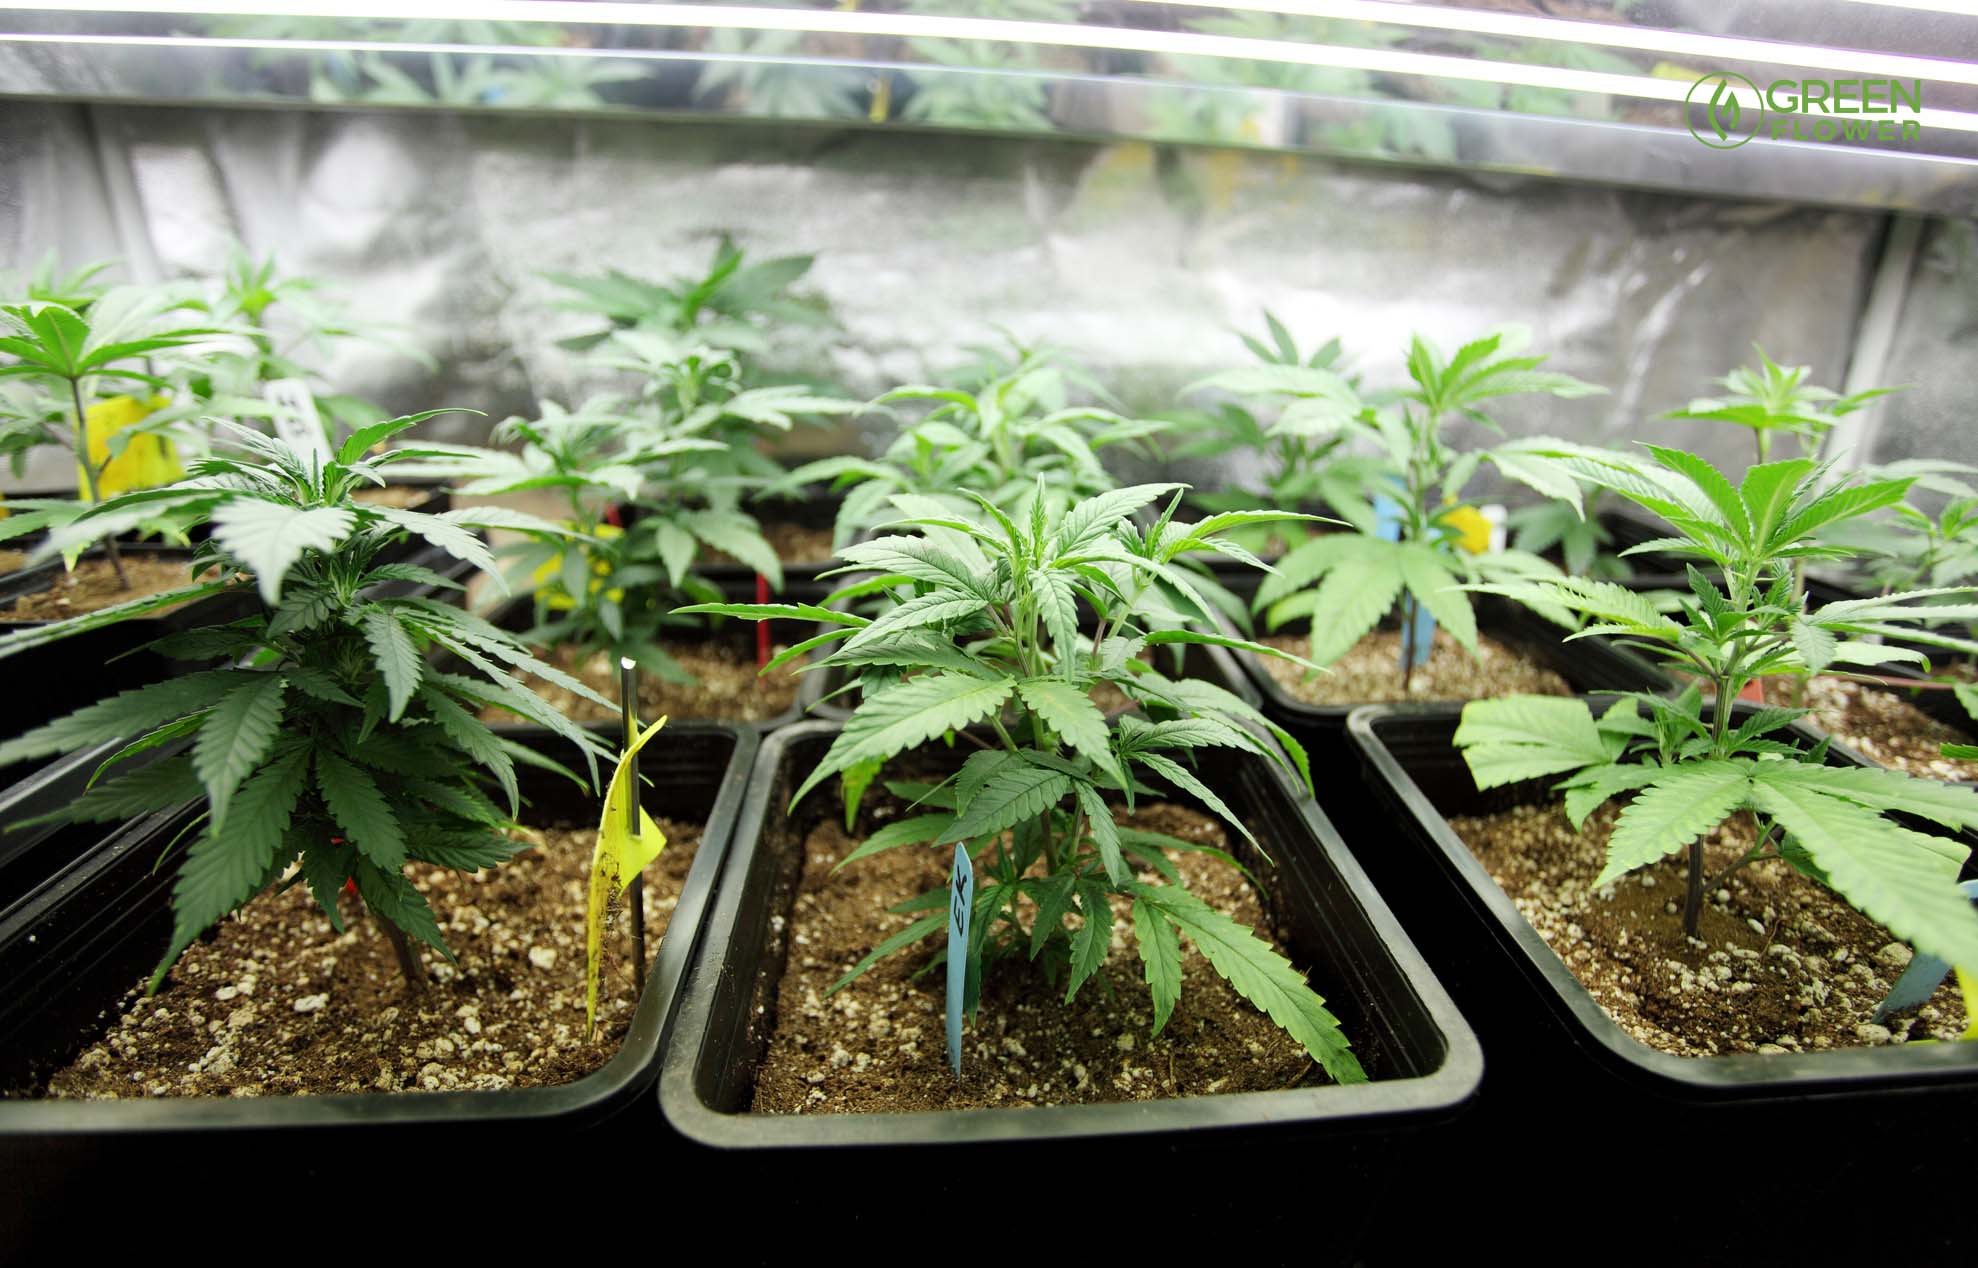 Top 5 Reasons Clones Trump Seeds for Successful Outdoor Cannabis Cultivation